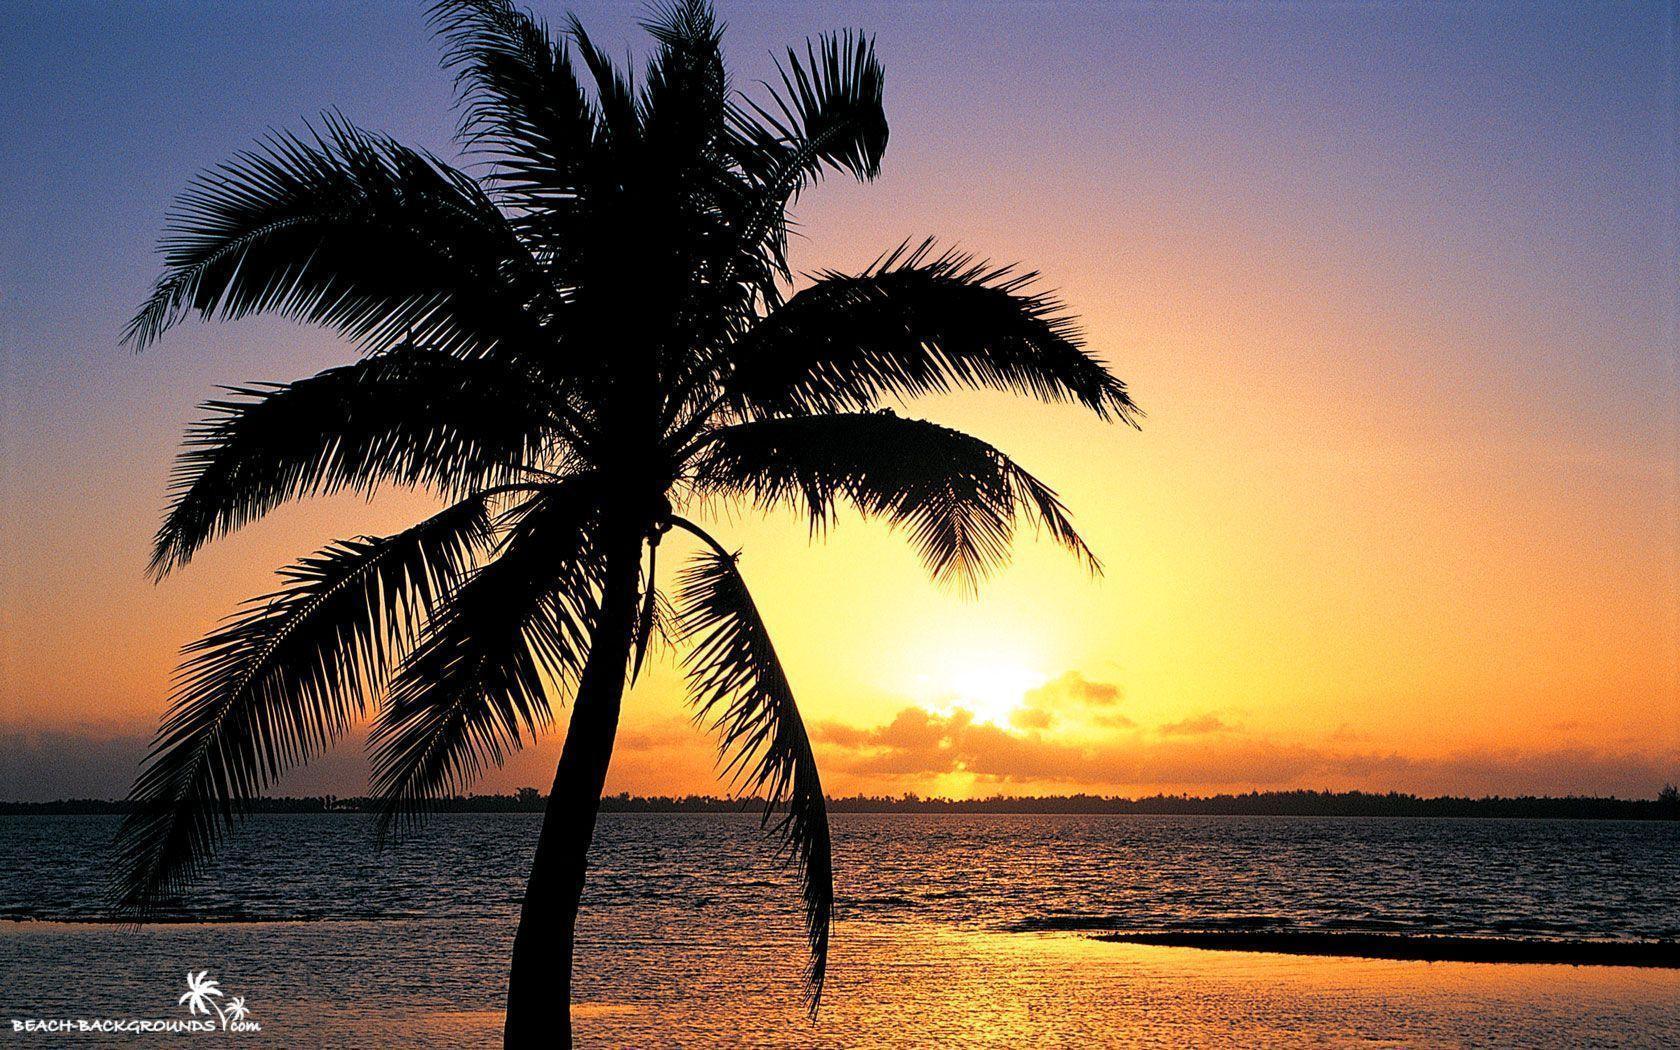 Beach Sunset And Palm Trees HD Wallpaper For Desktop Background